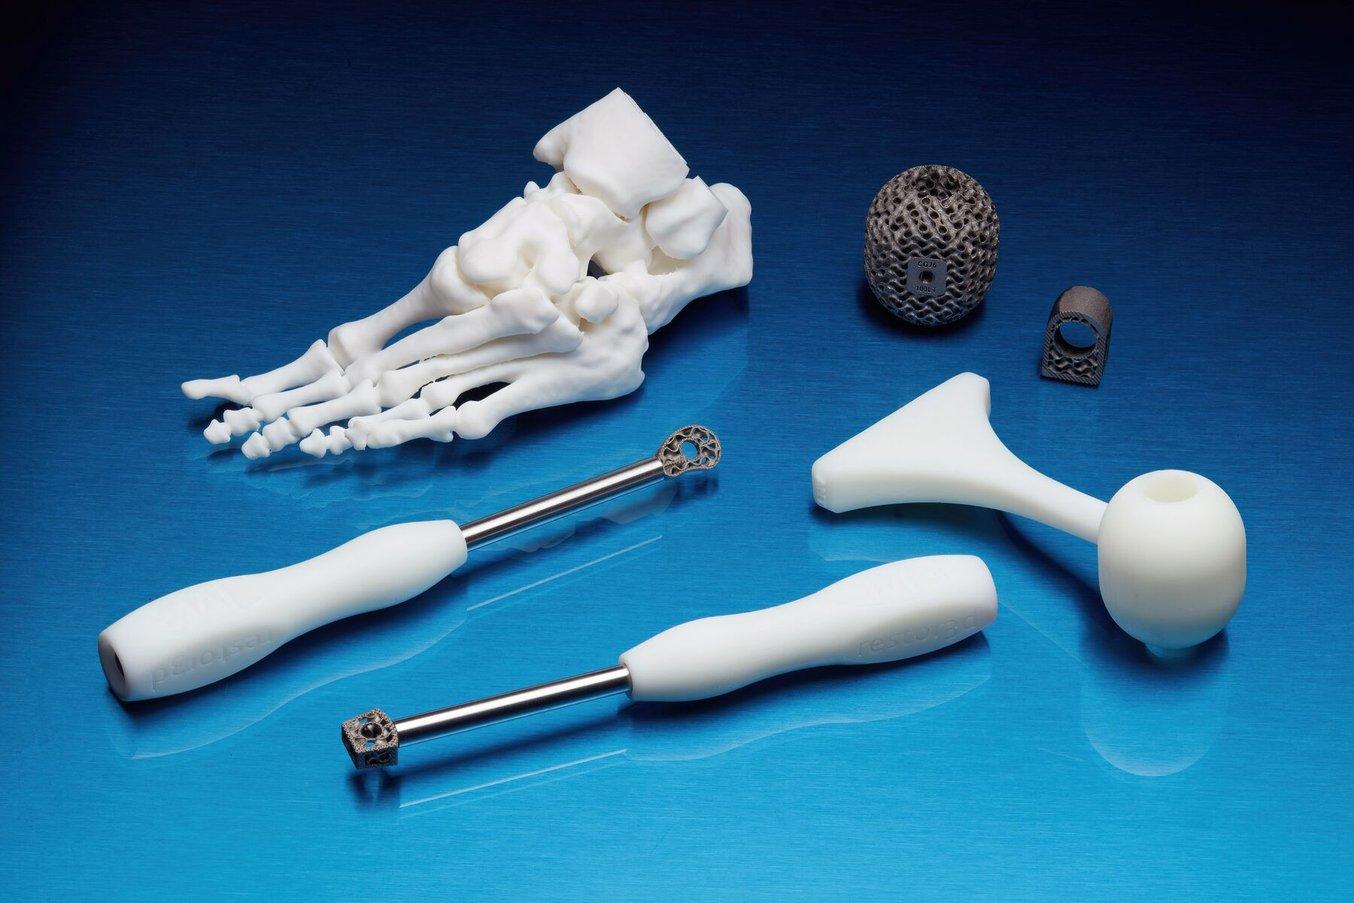 Surgical models and tools printed printed in white BioMed Resin and including some metal parts